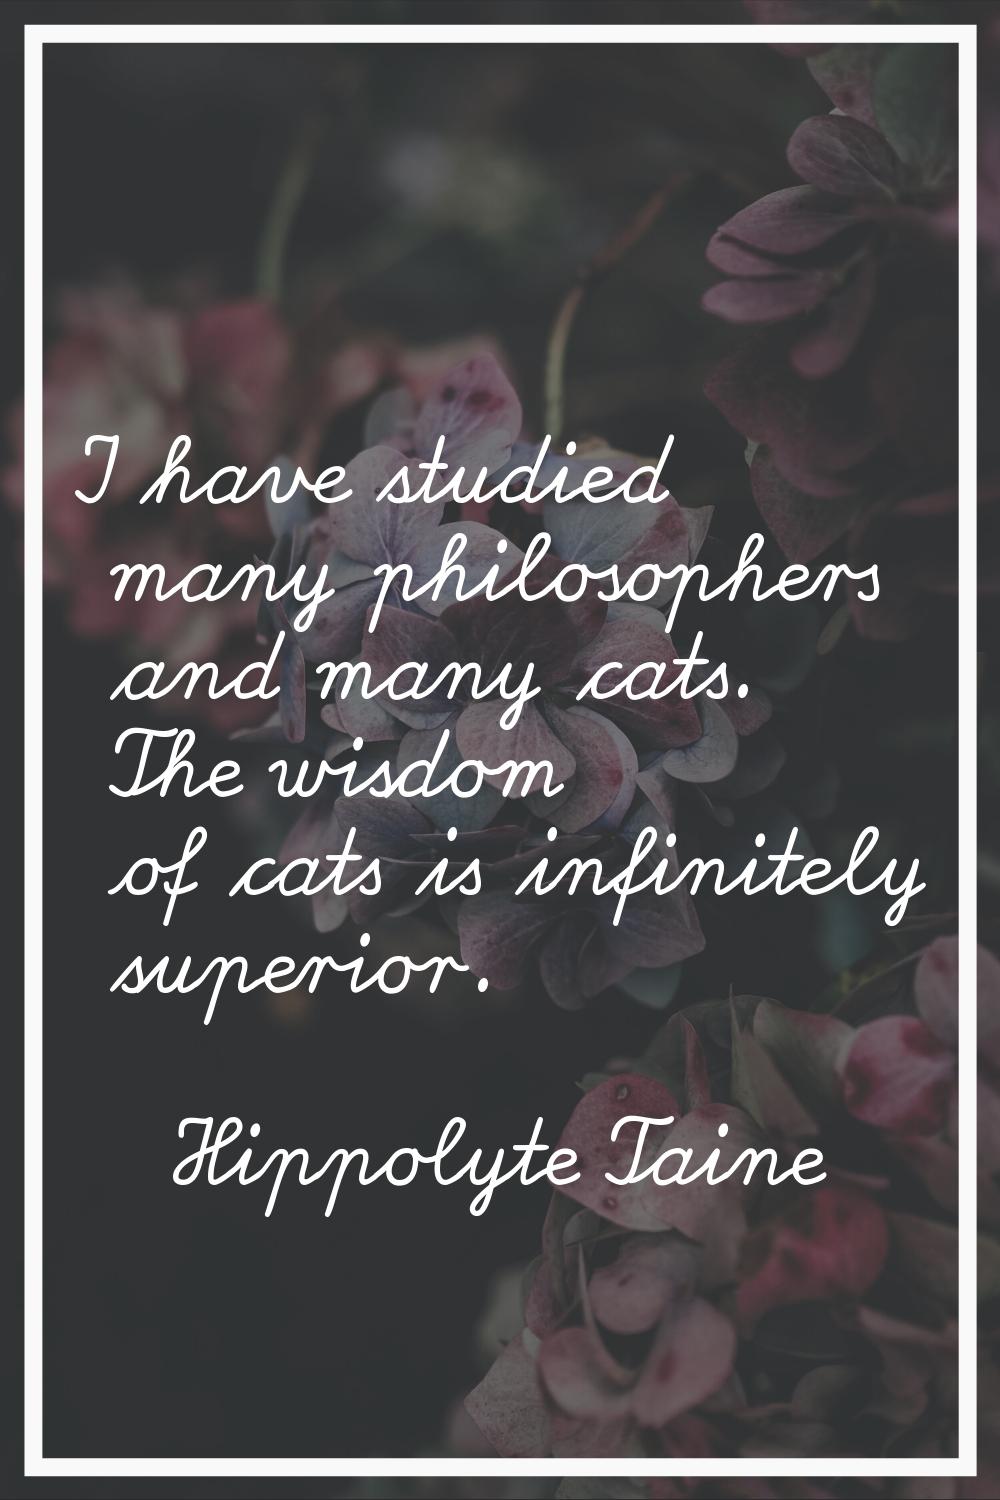 I have studied many philosophers and many cats. The wisdom of cats is infinitely superior.